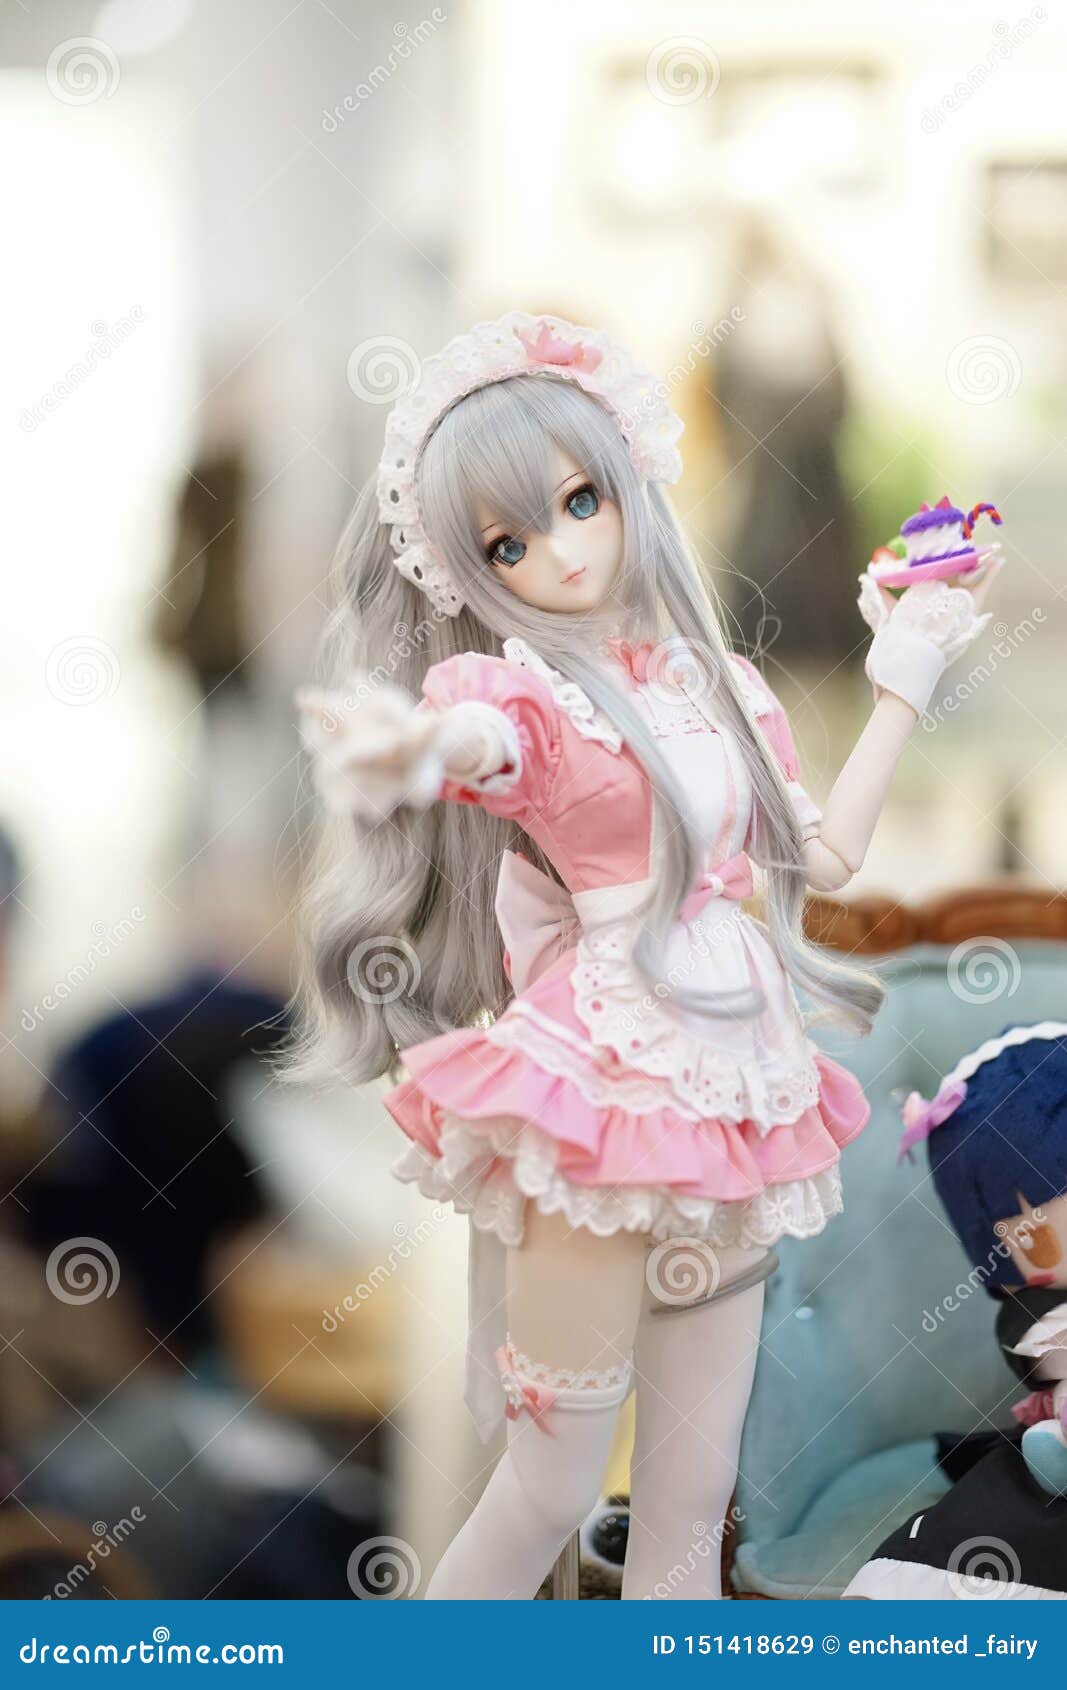 Cute Doll on Display. a Portrait Photo of a Maid Girl Wearing a ...